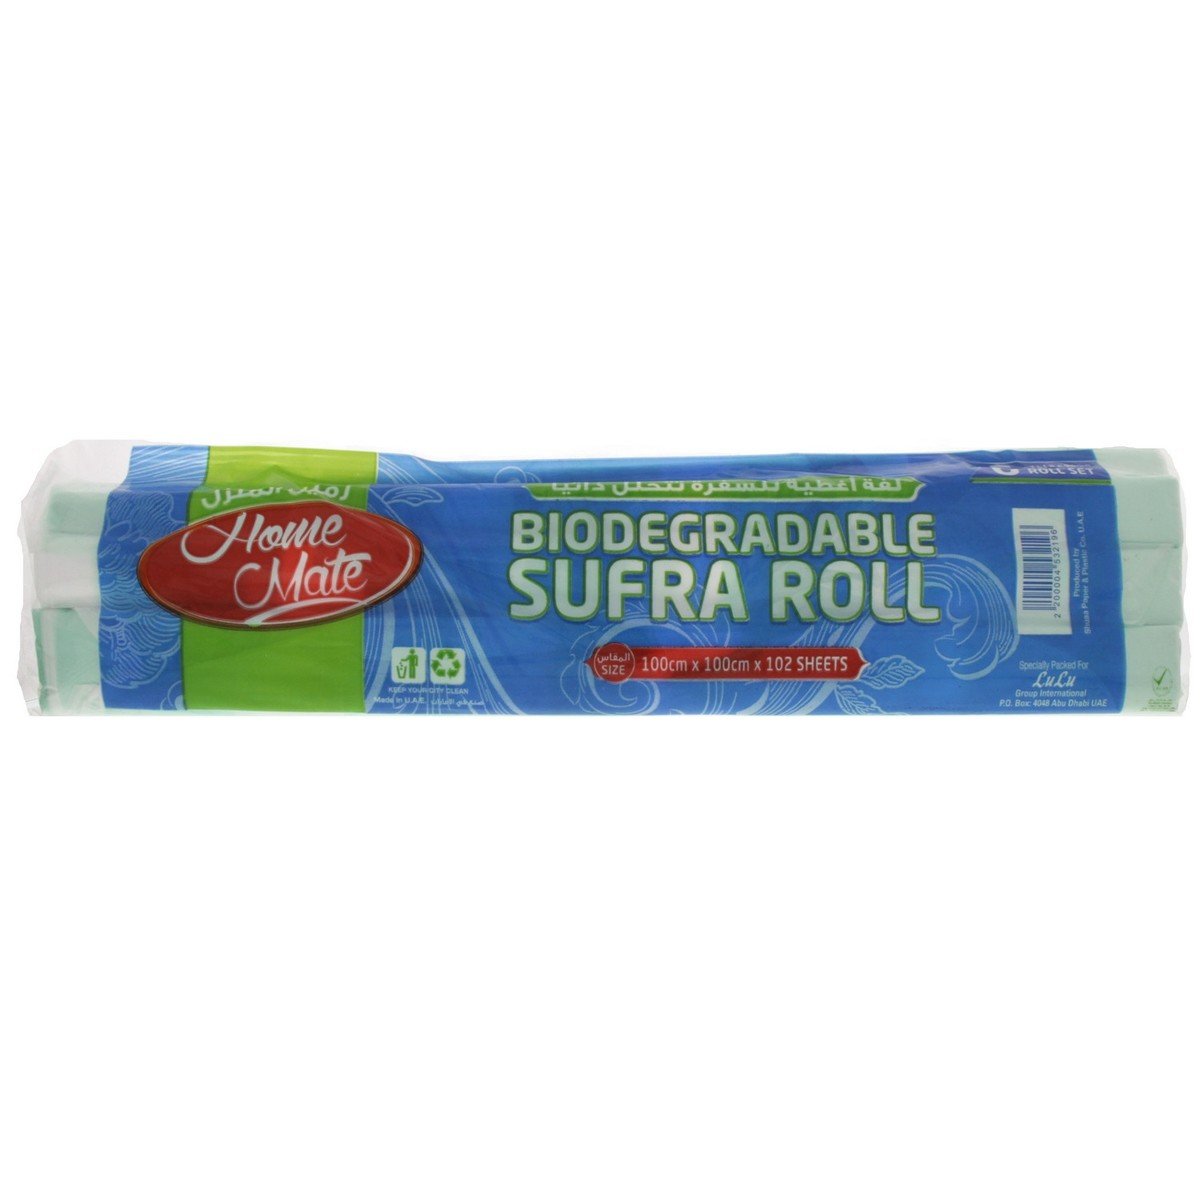 Home Mate Biodegradable Sufra Roll 6pcs